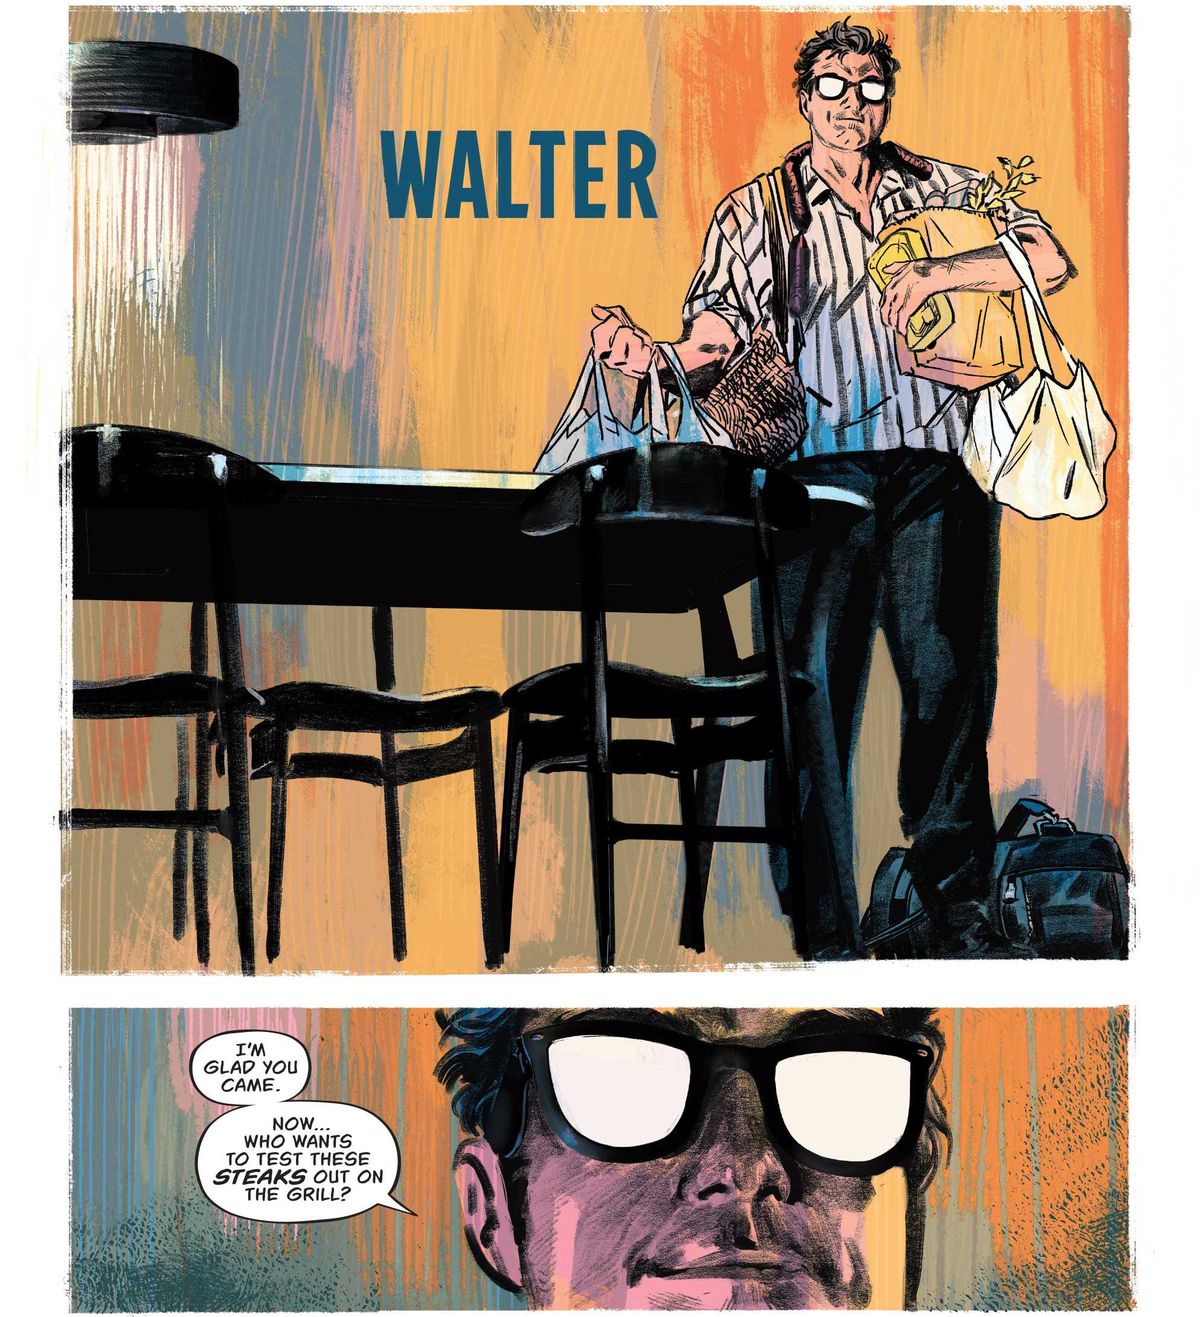 Walter sets groceries down on a table, saying “I’m glad you came. Now... who wants to test these steaks out on the grill?” His glasses reflect the light ominously like an anime villain in The Nice House on the Lake #1, DC Comics (2021).